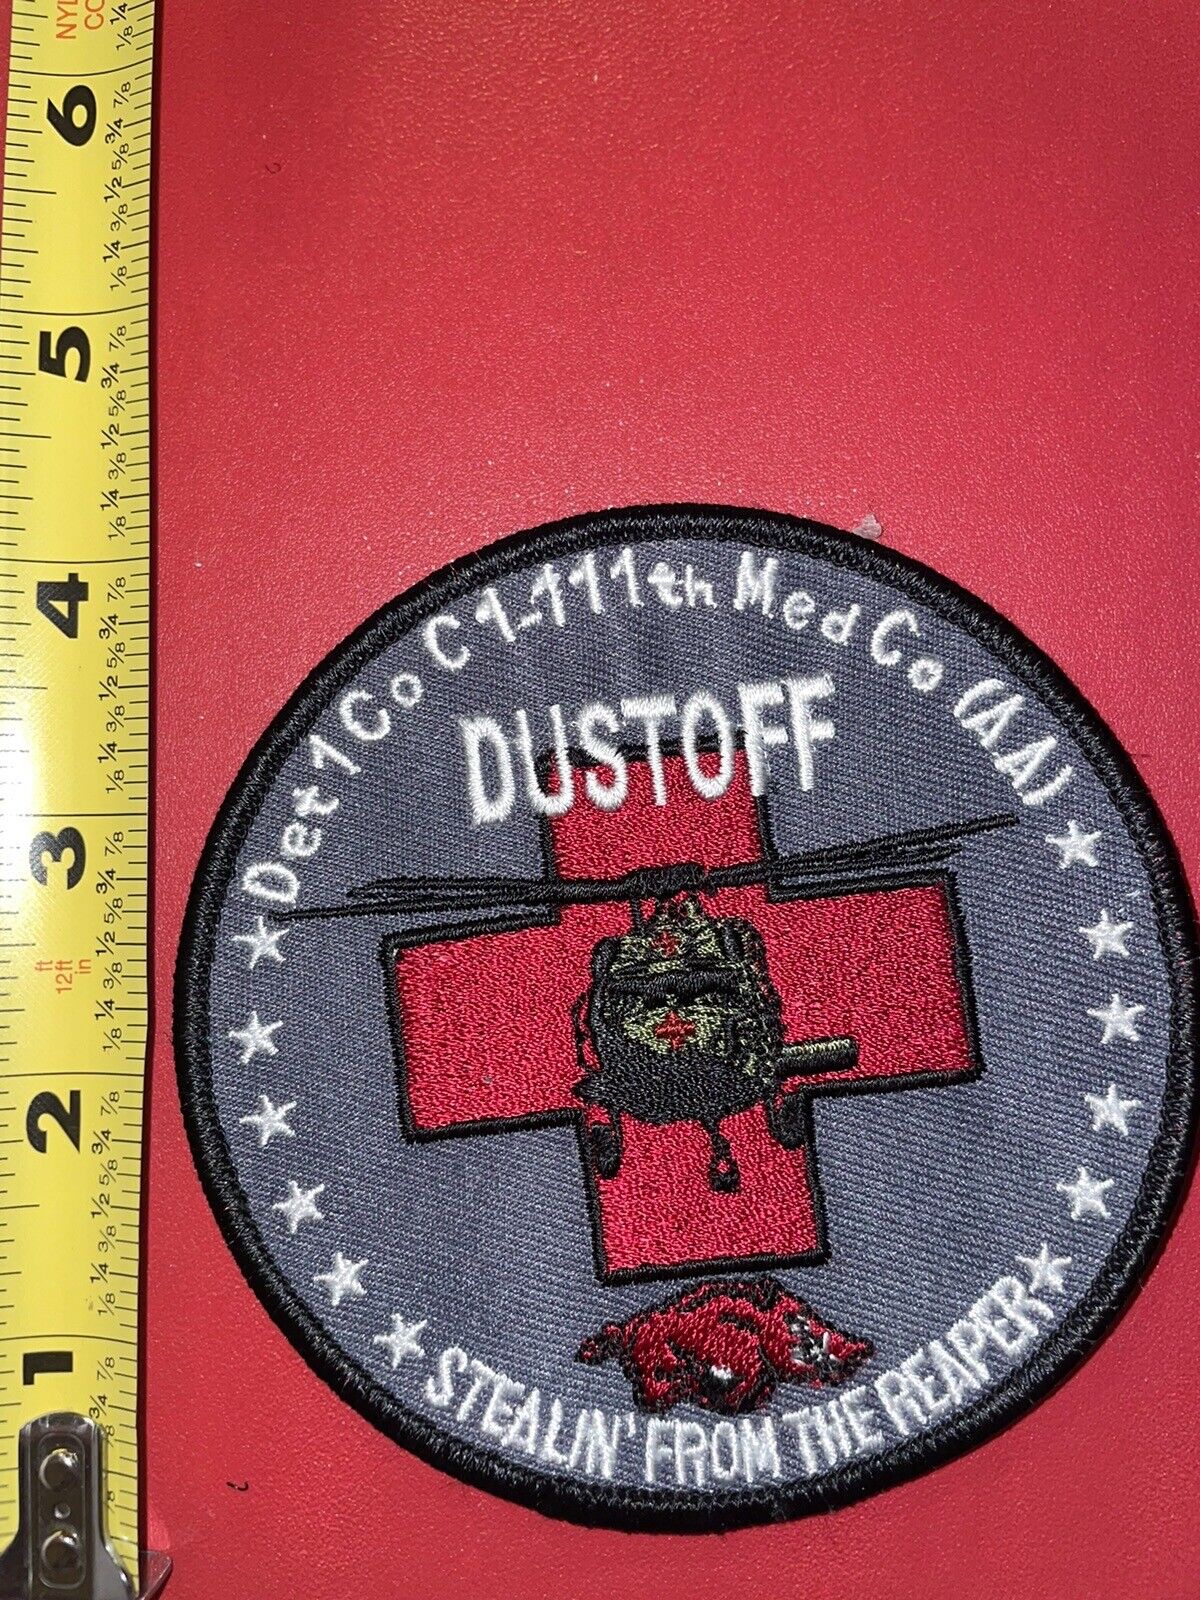 GWOT MILITARY PATCH 10) Detachment 1 Company C 1-111th Medical Company Dustoff